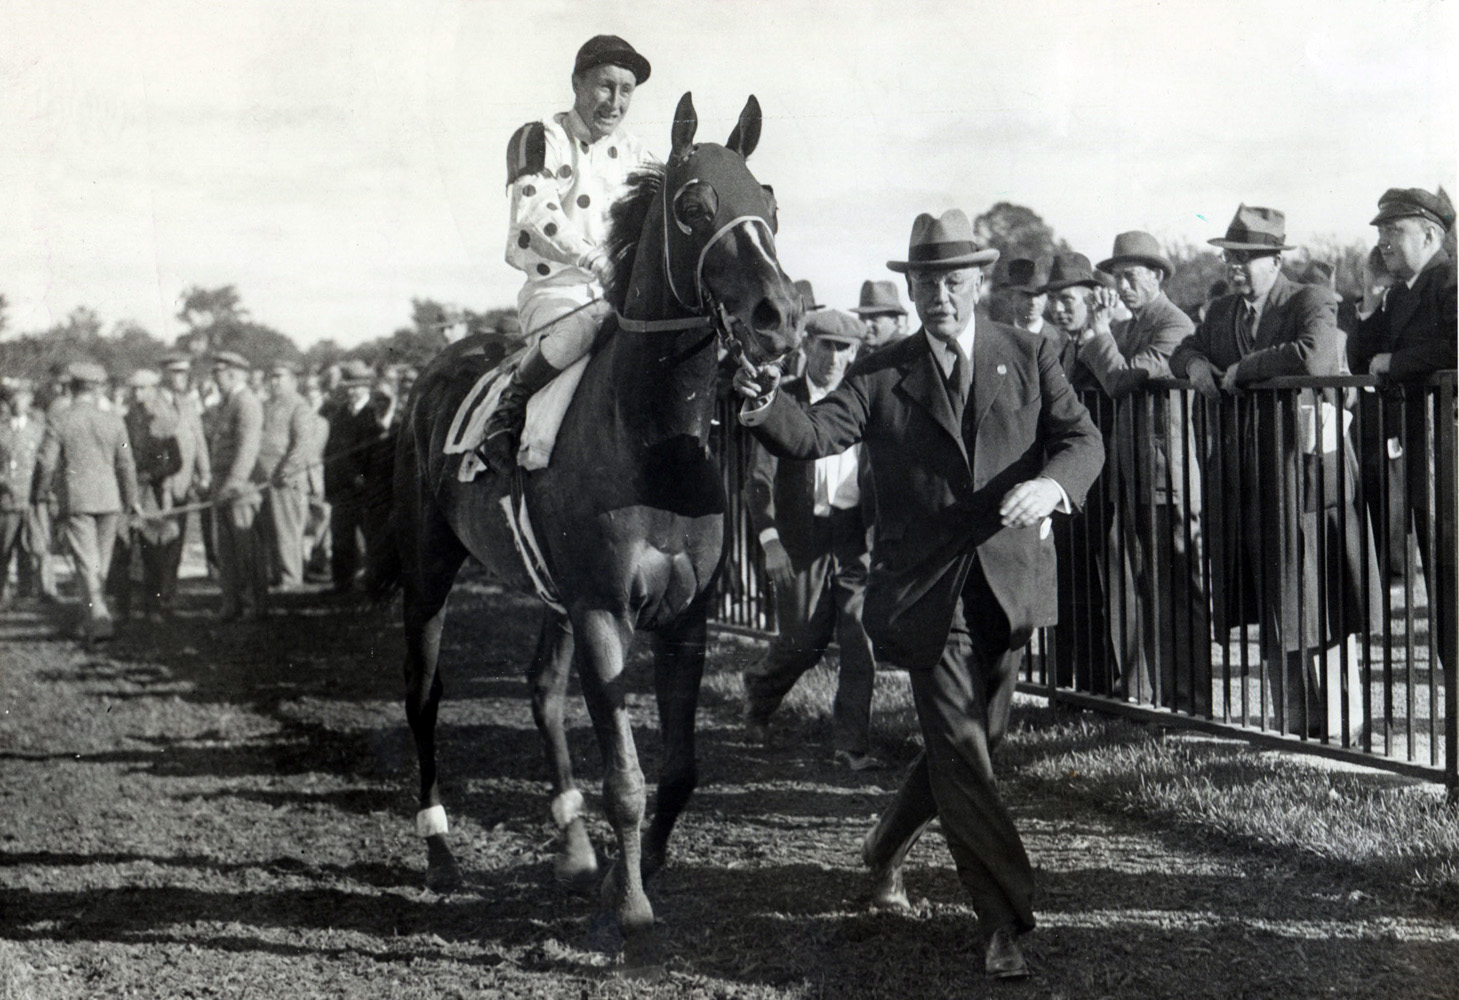 James Stout and Granville being led in by William Woodward after winning the 1936 Lawrence Realization at Belmont Park (Museum Collection)